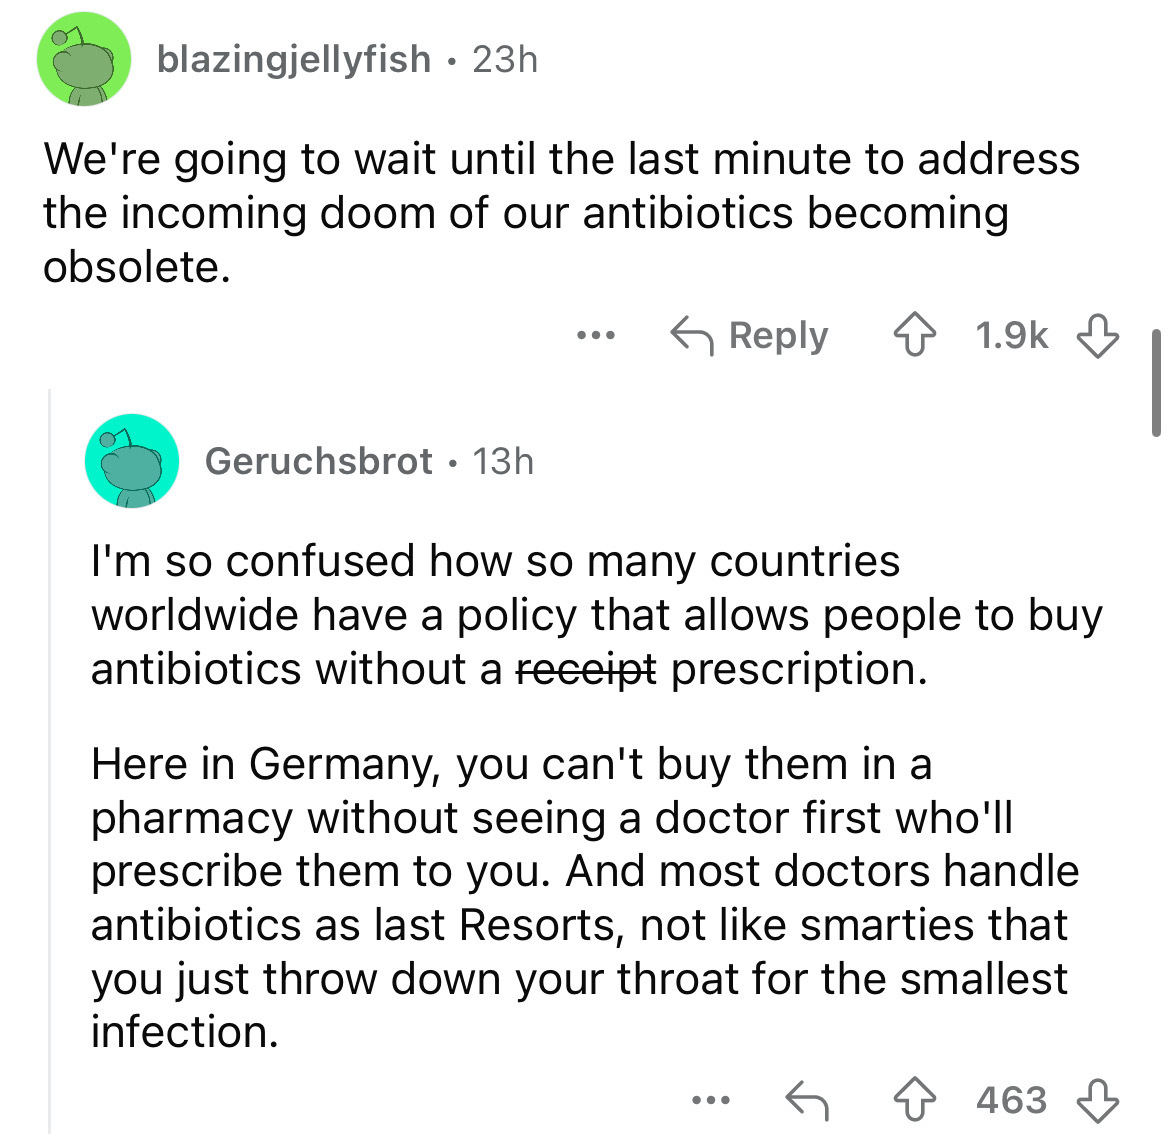 screenshot - blazingjellyfish 23h . We're going to wait until the last minute to address the incoming doom of our antibiotics becoming obsolete. Geruchsbrot 13h I'm so confused how so many countries worldwide have a policy that allows people to buy antibi